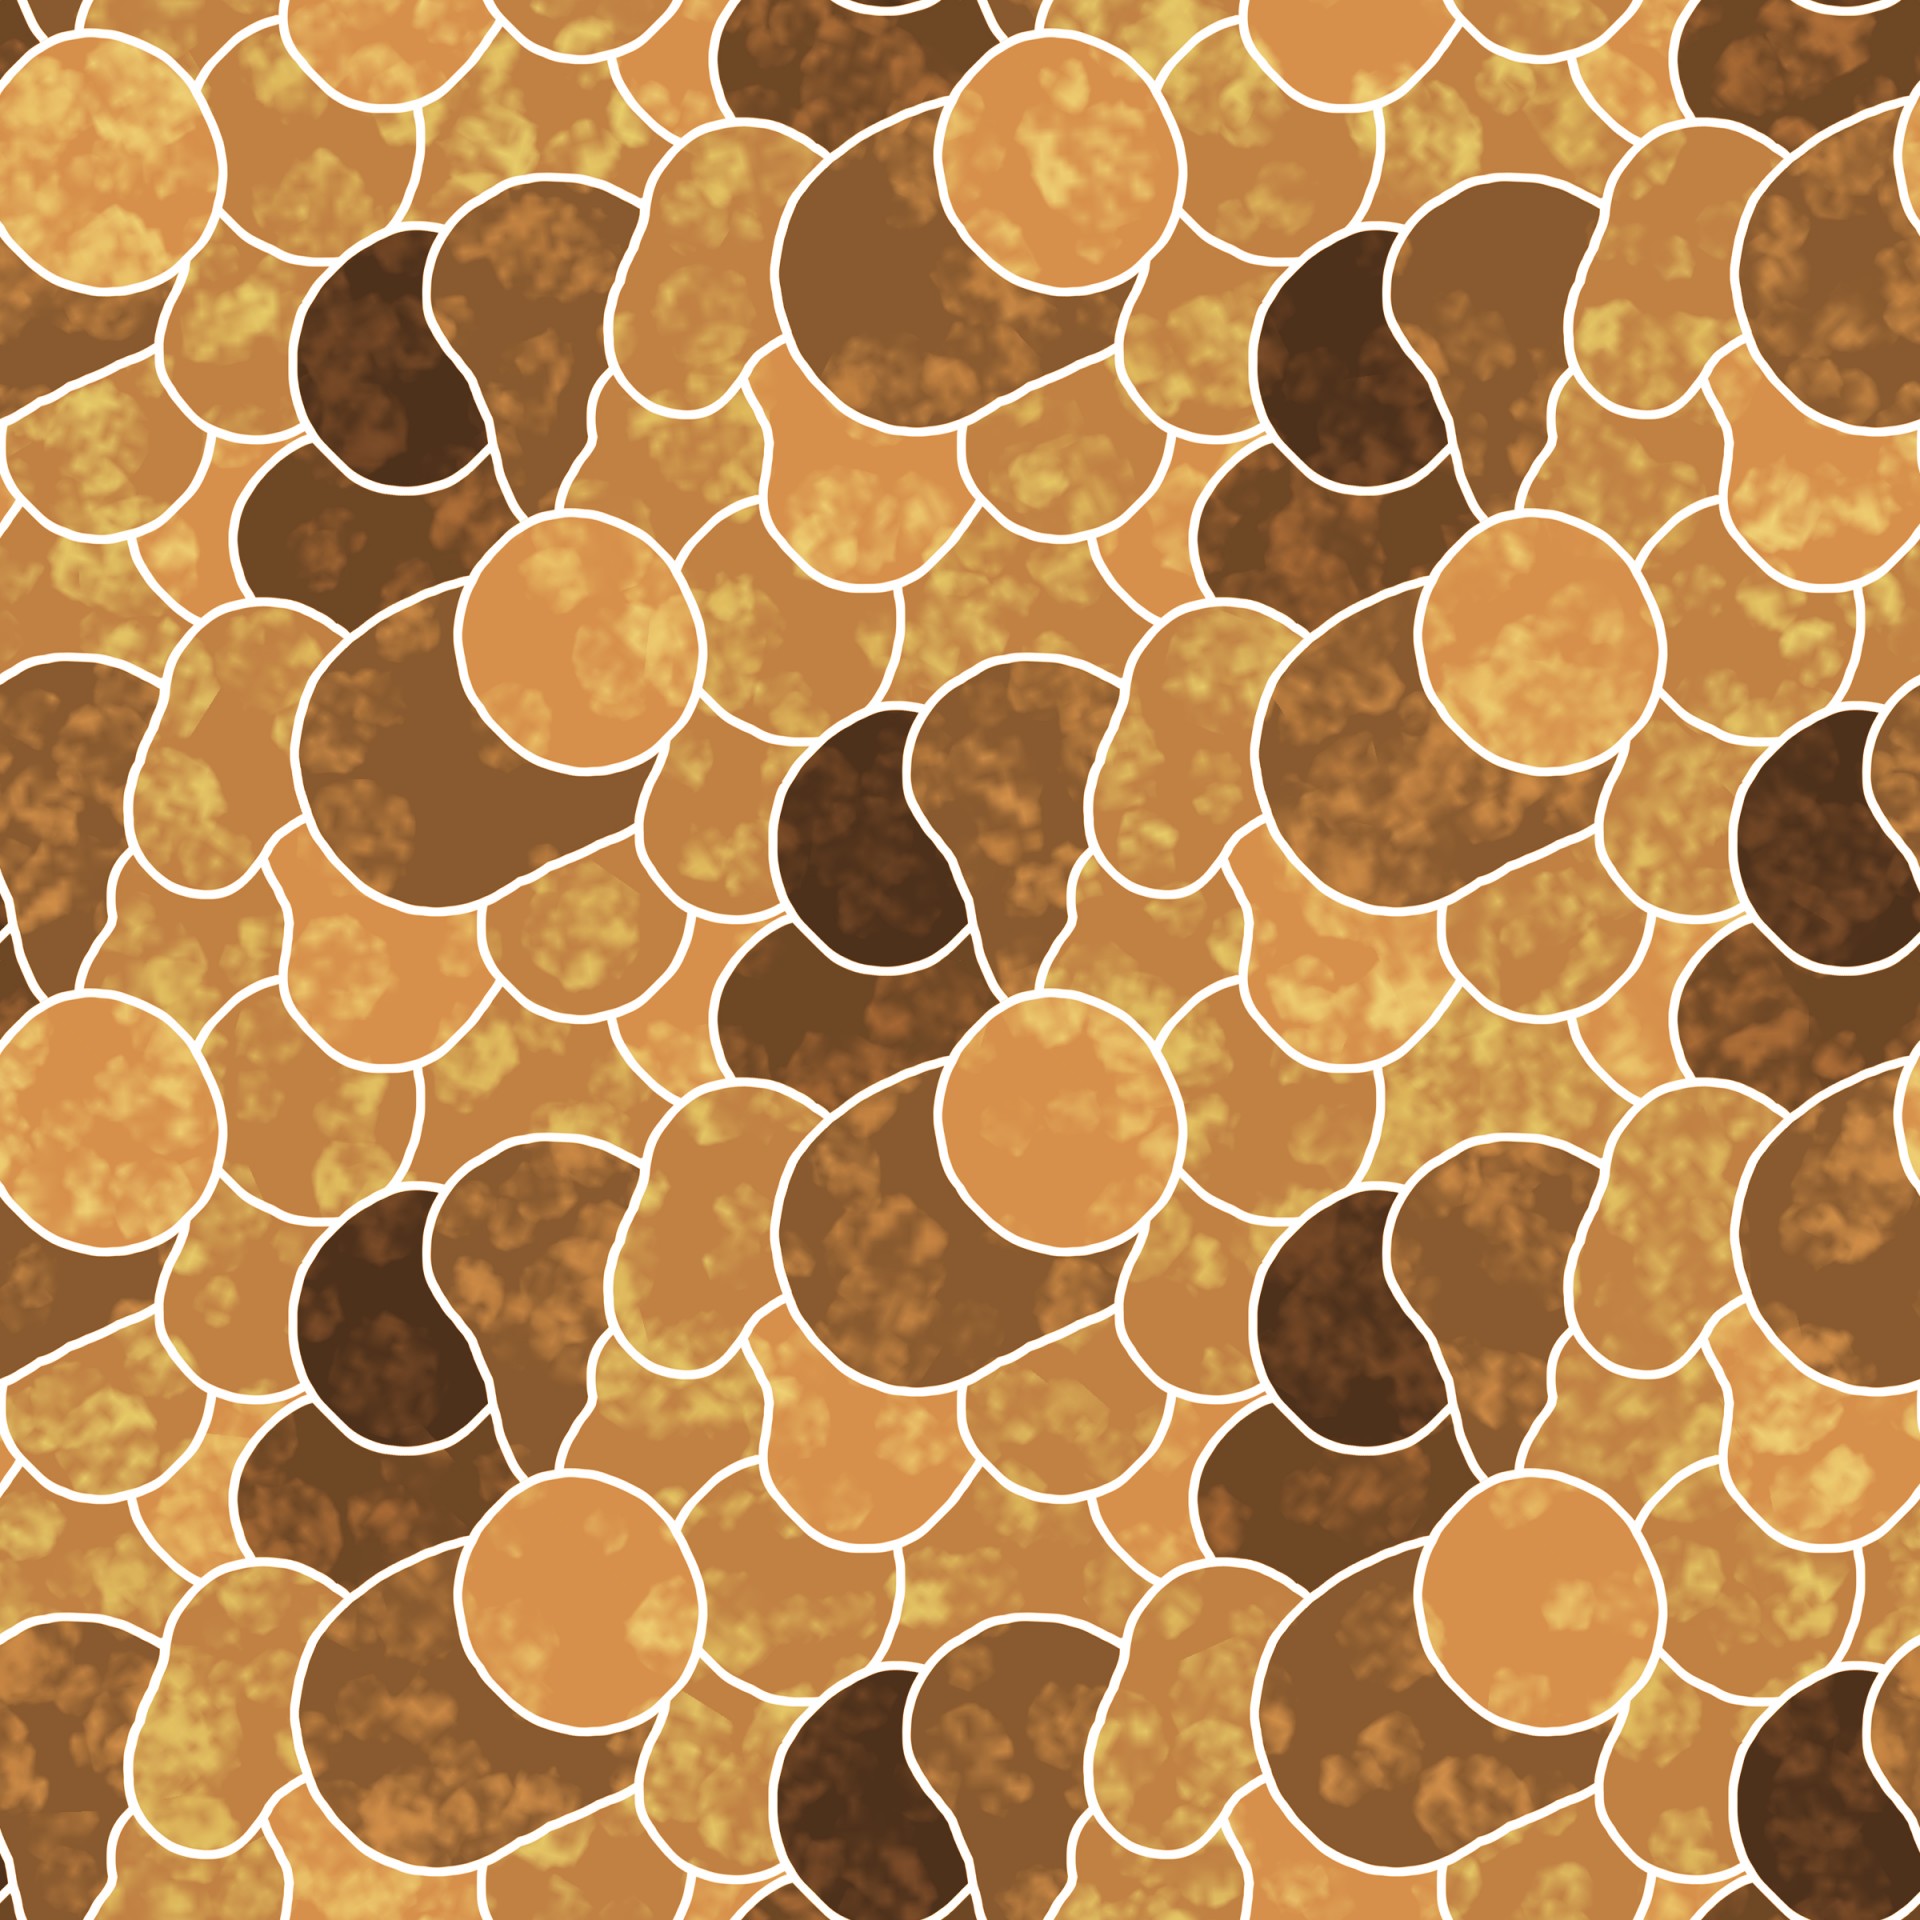 shapes-pattern-free-stock-photo-public-domain-pictures